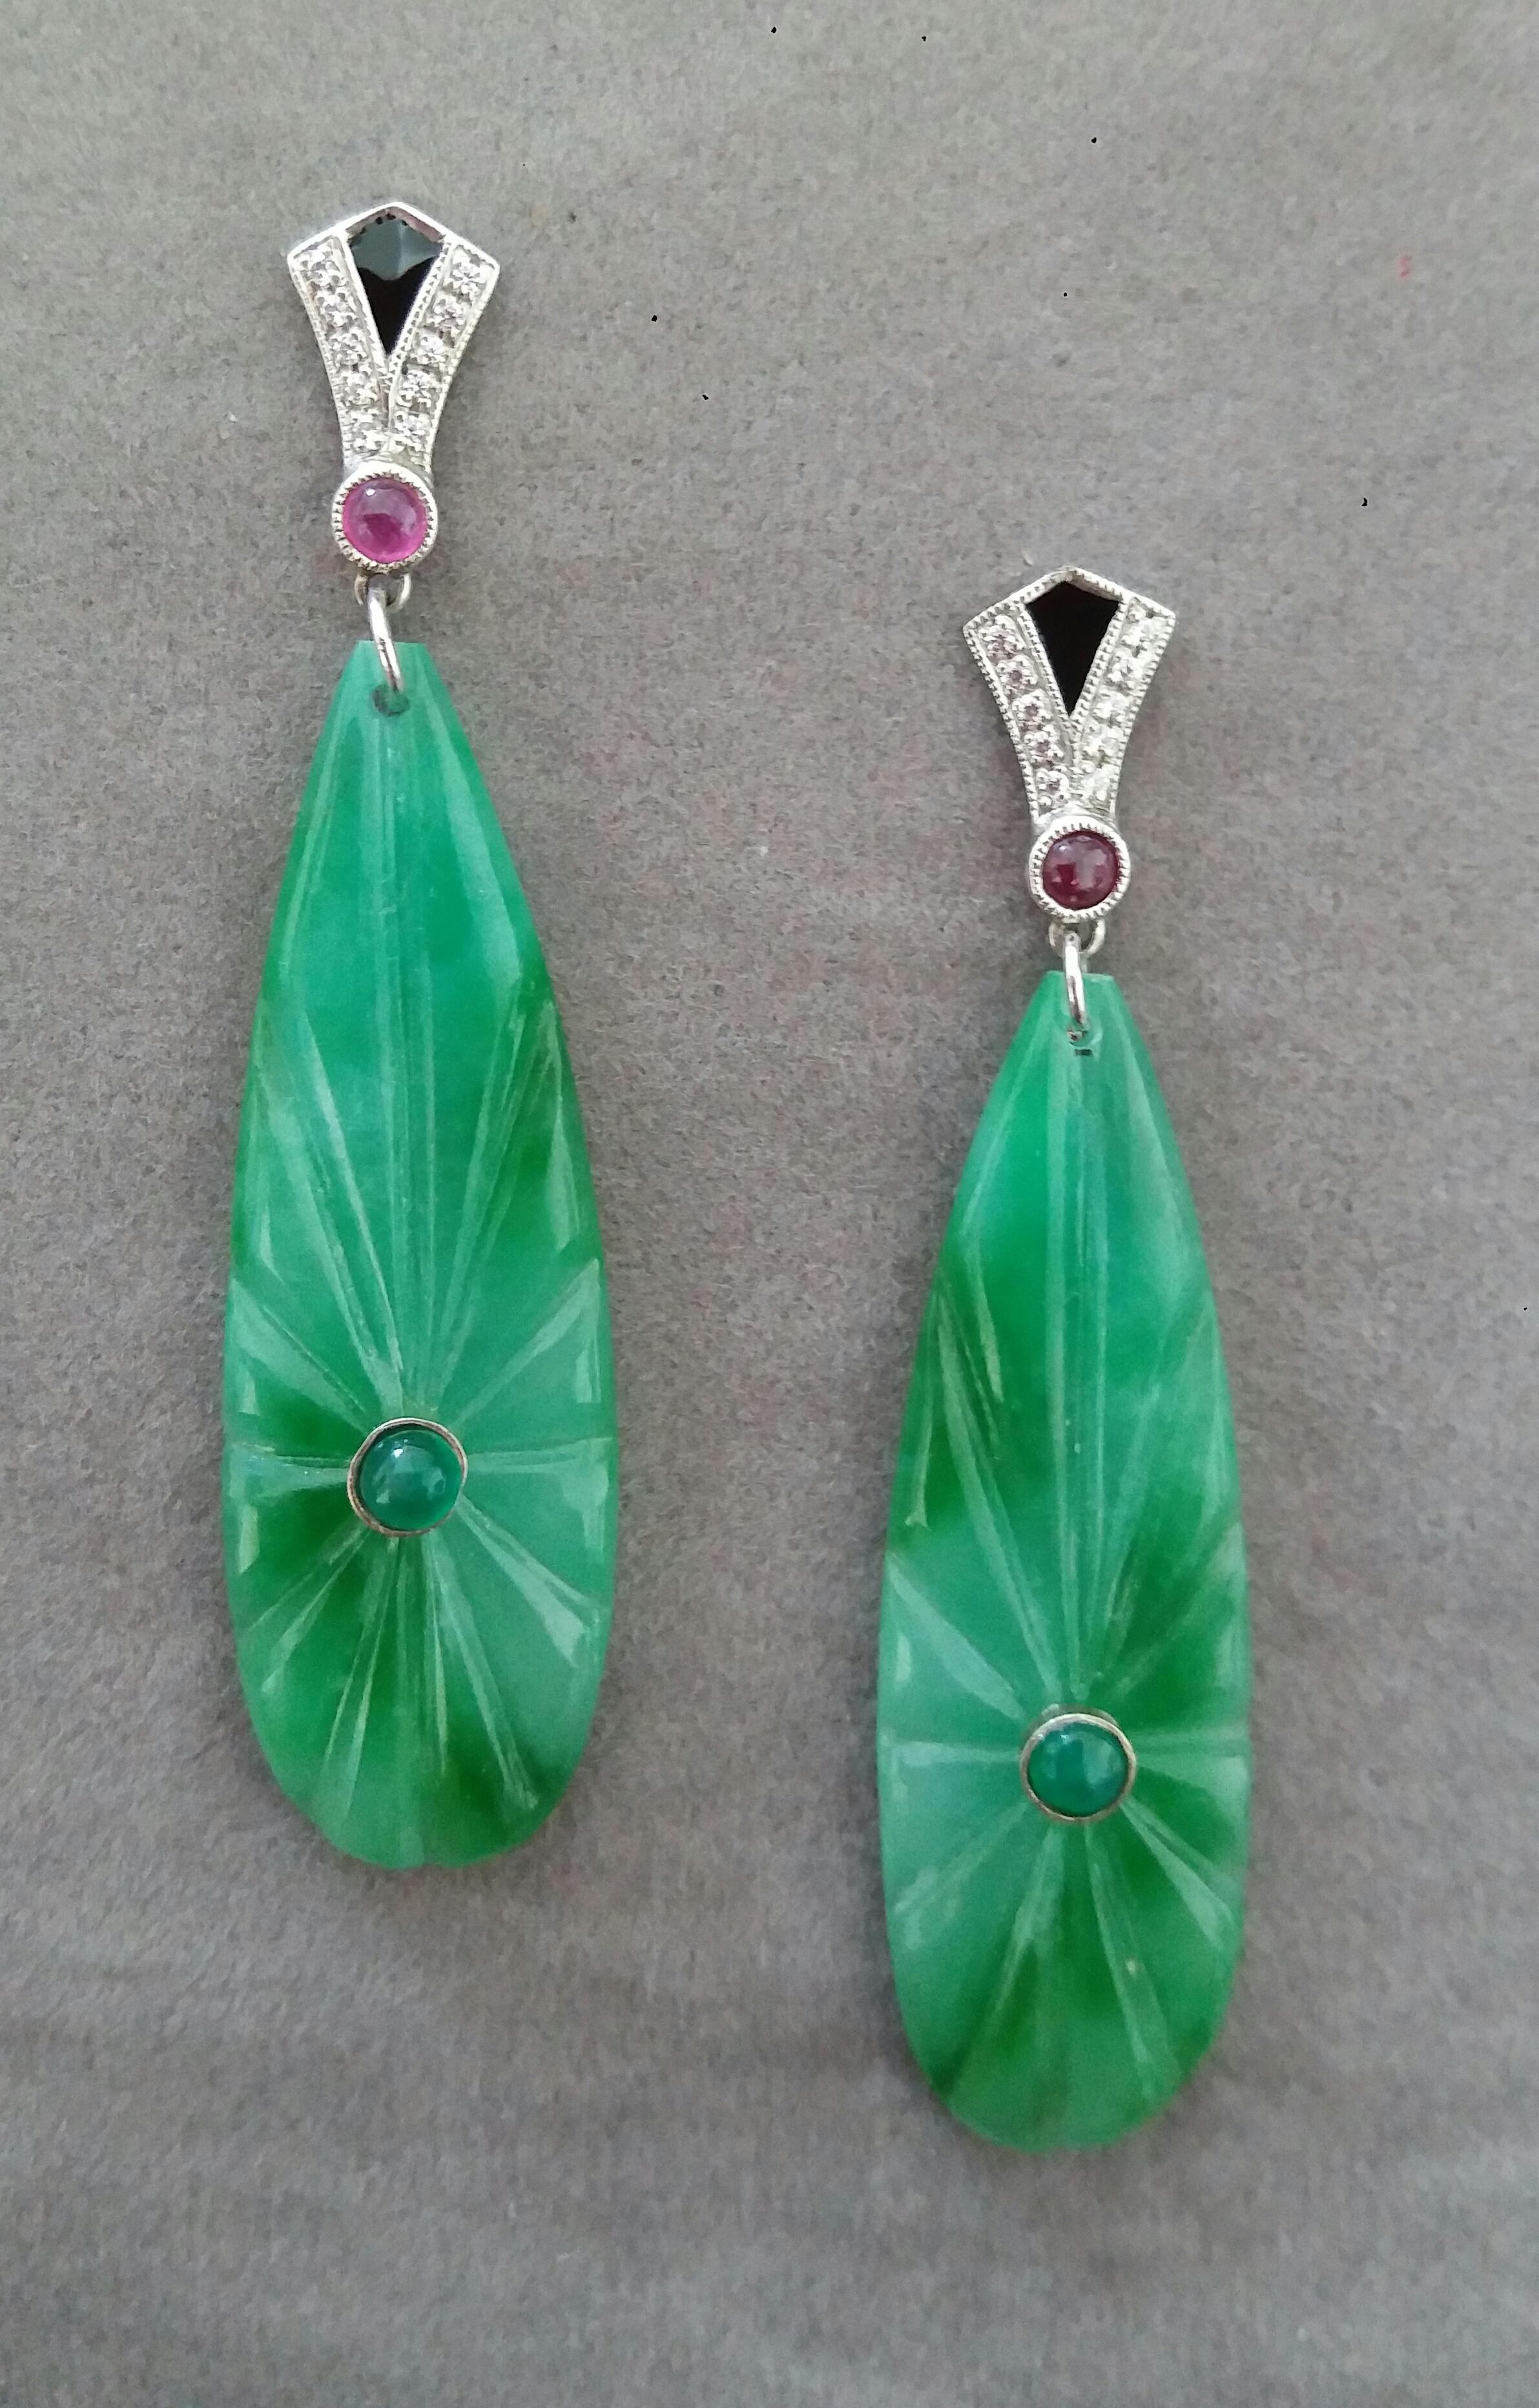 In these classic Art Deco Style earrings the tops are 2 parts  in 14 kt.white gold, 20 round full cut diamonds,small round ruby cabs and black enamel ,in the lower parts we have 2 Burma Jade engraved  drops measuring 15 x 41 mm with 2 small emeralds